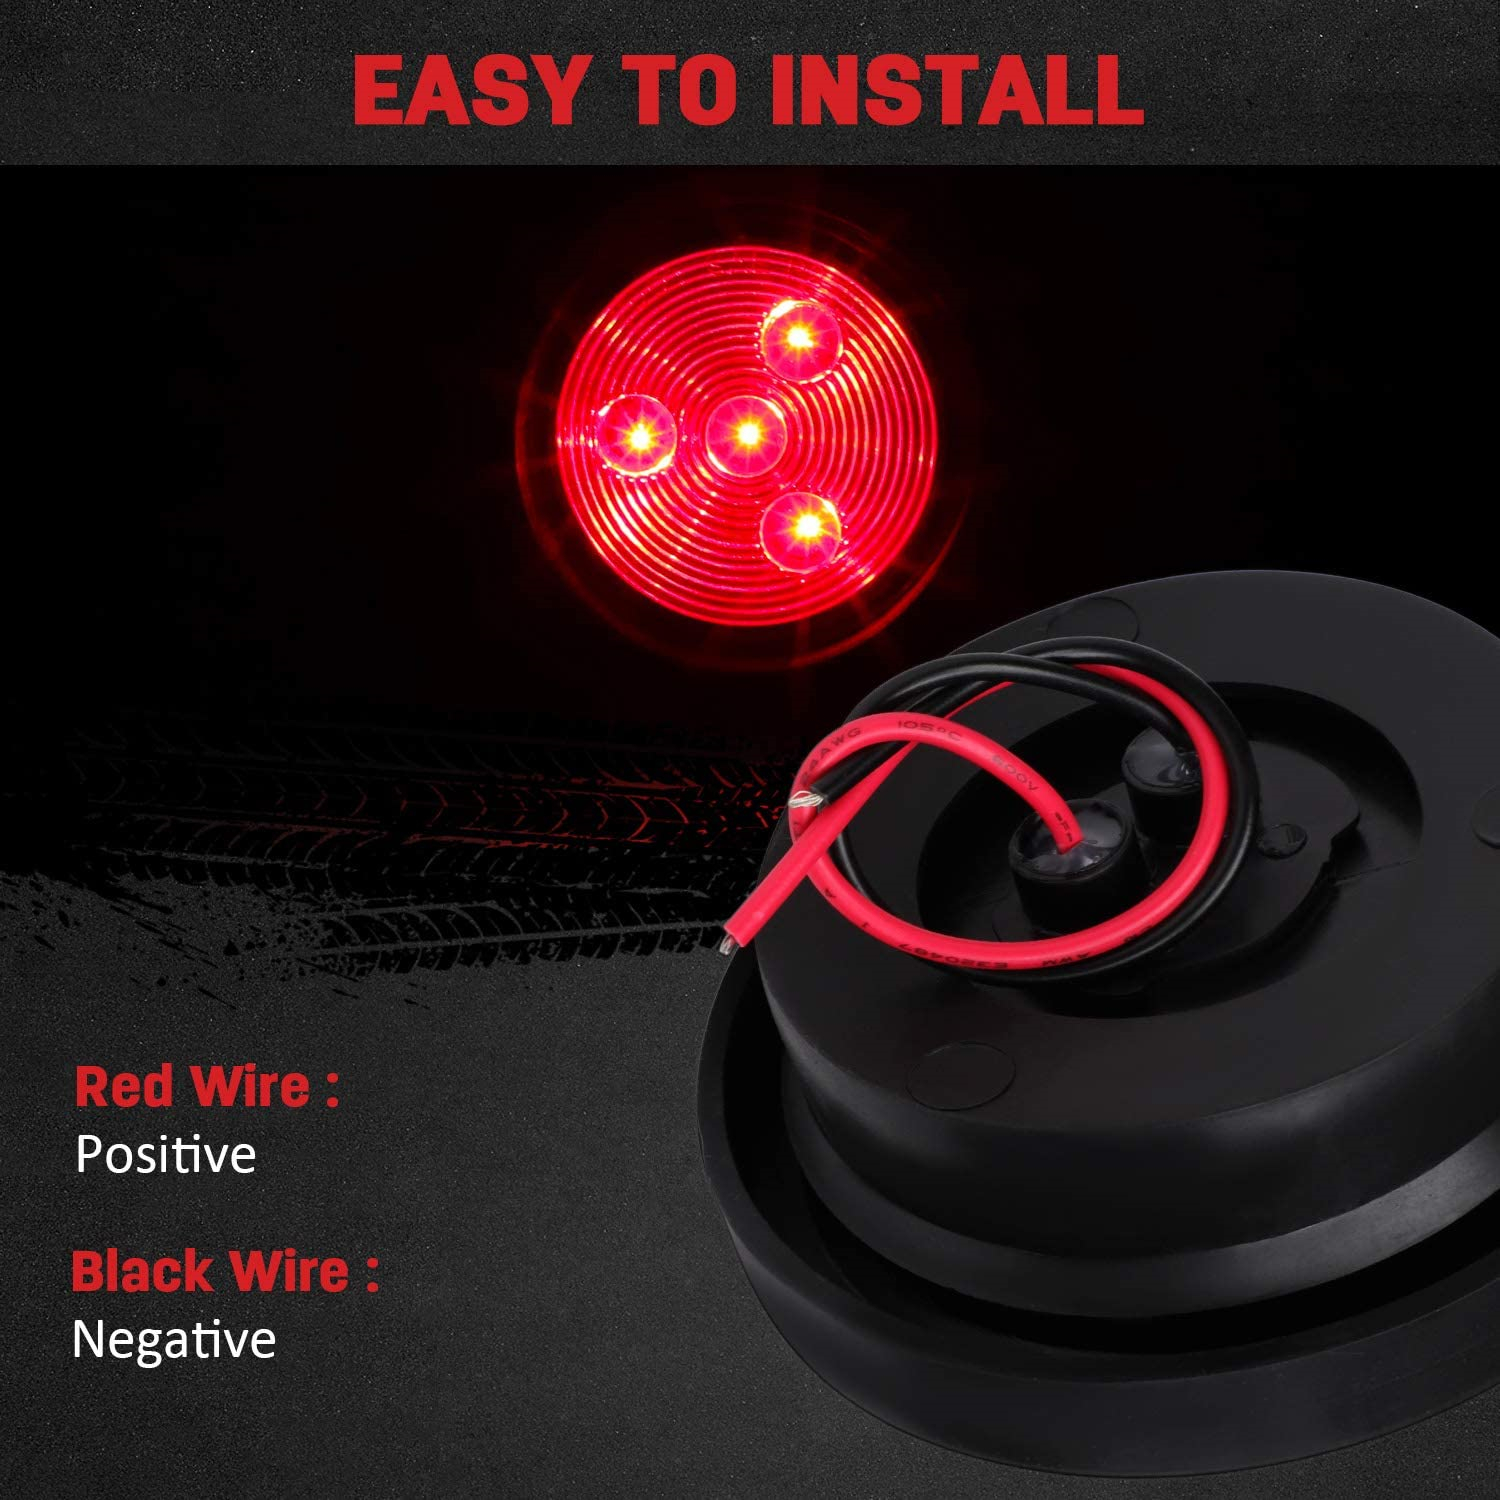 4PCS 2.5” Red Round Side Marker Light Tail Lamps 4LED With Rubber Grommet for Truck Trailer Pickup